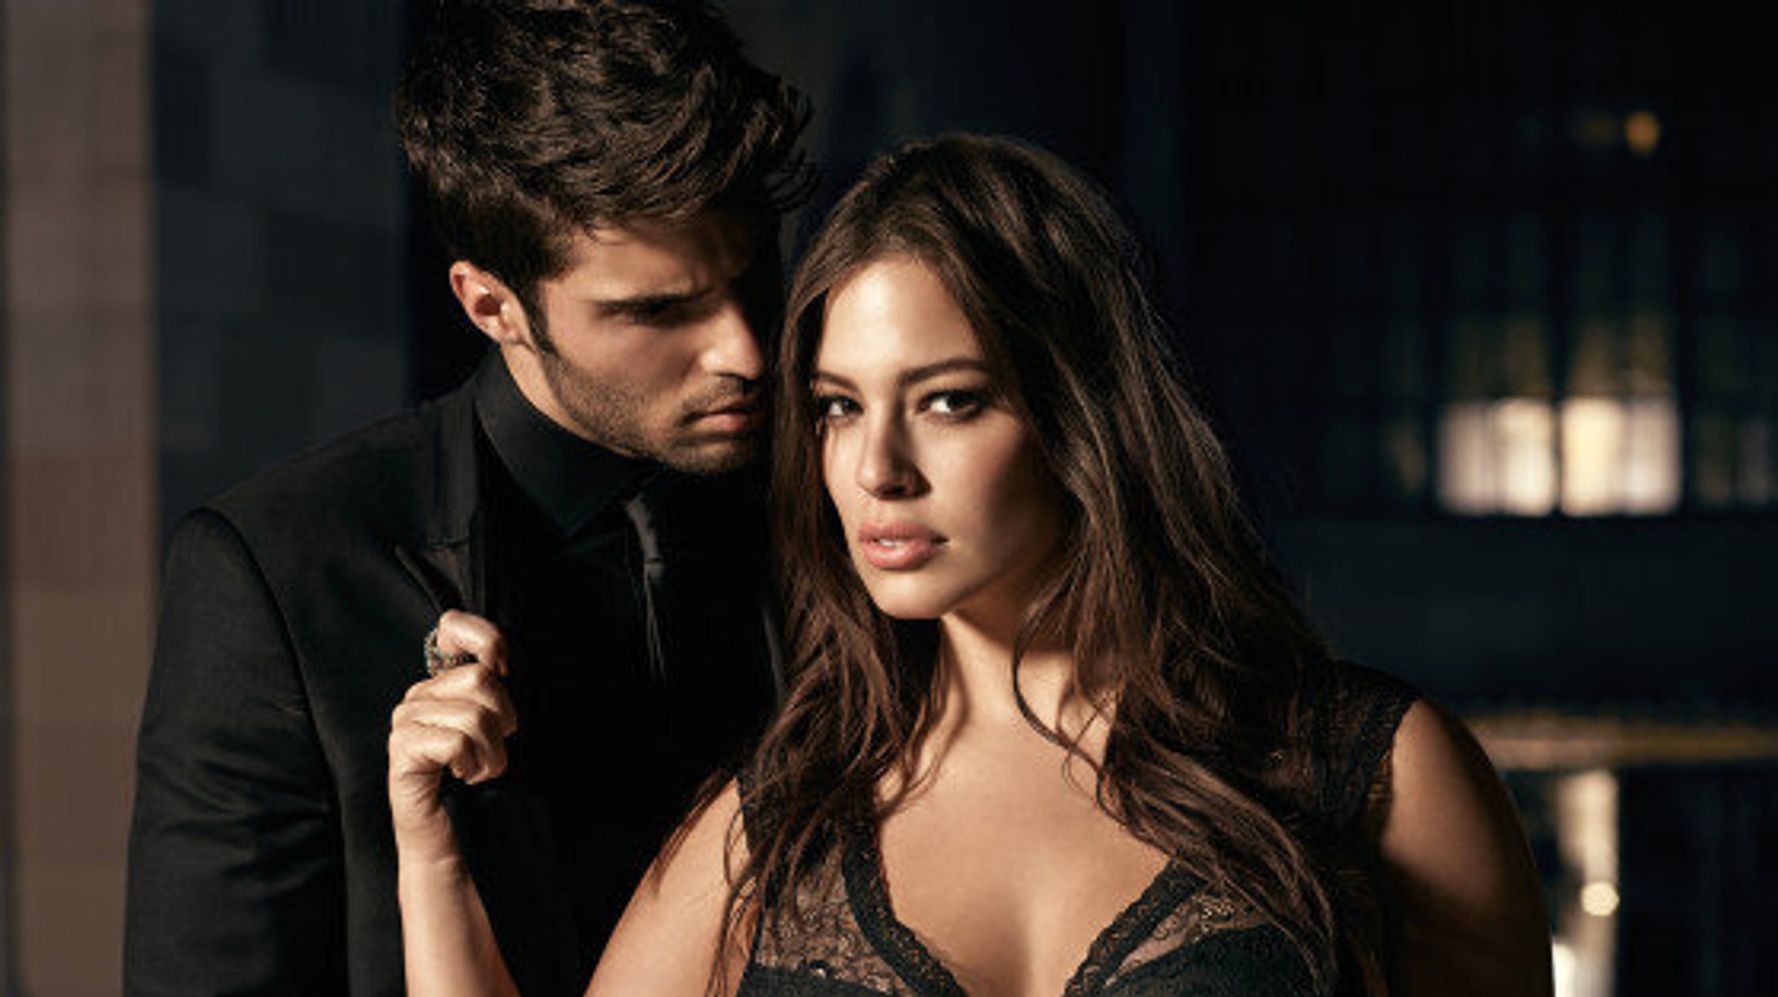 Ashley Graham launches Fifty Shades of Grey lingerie collection